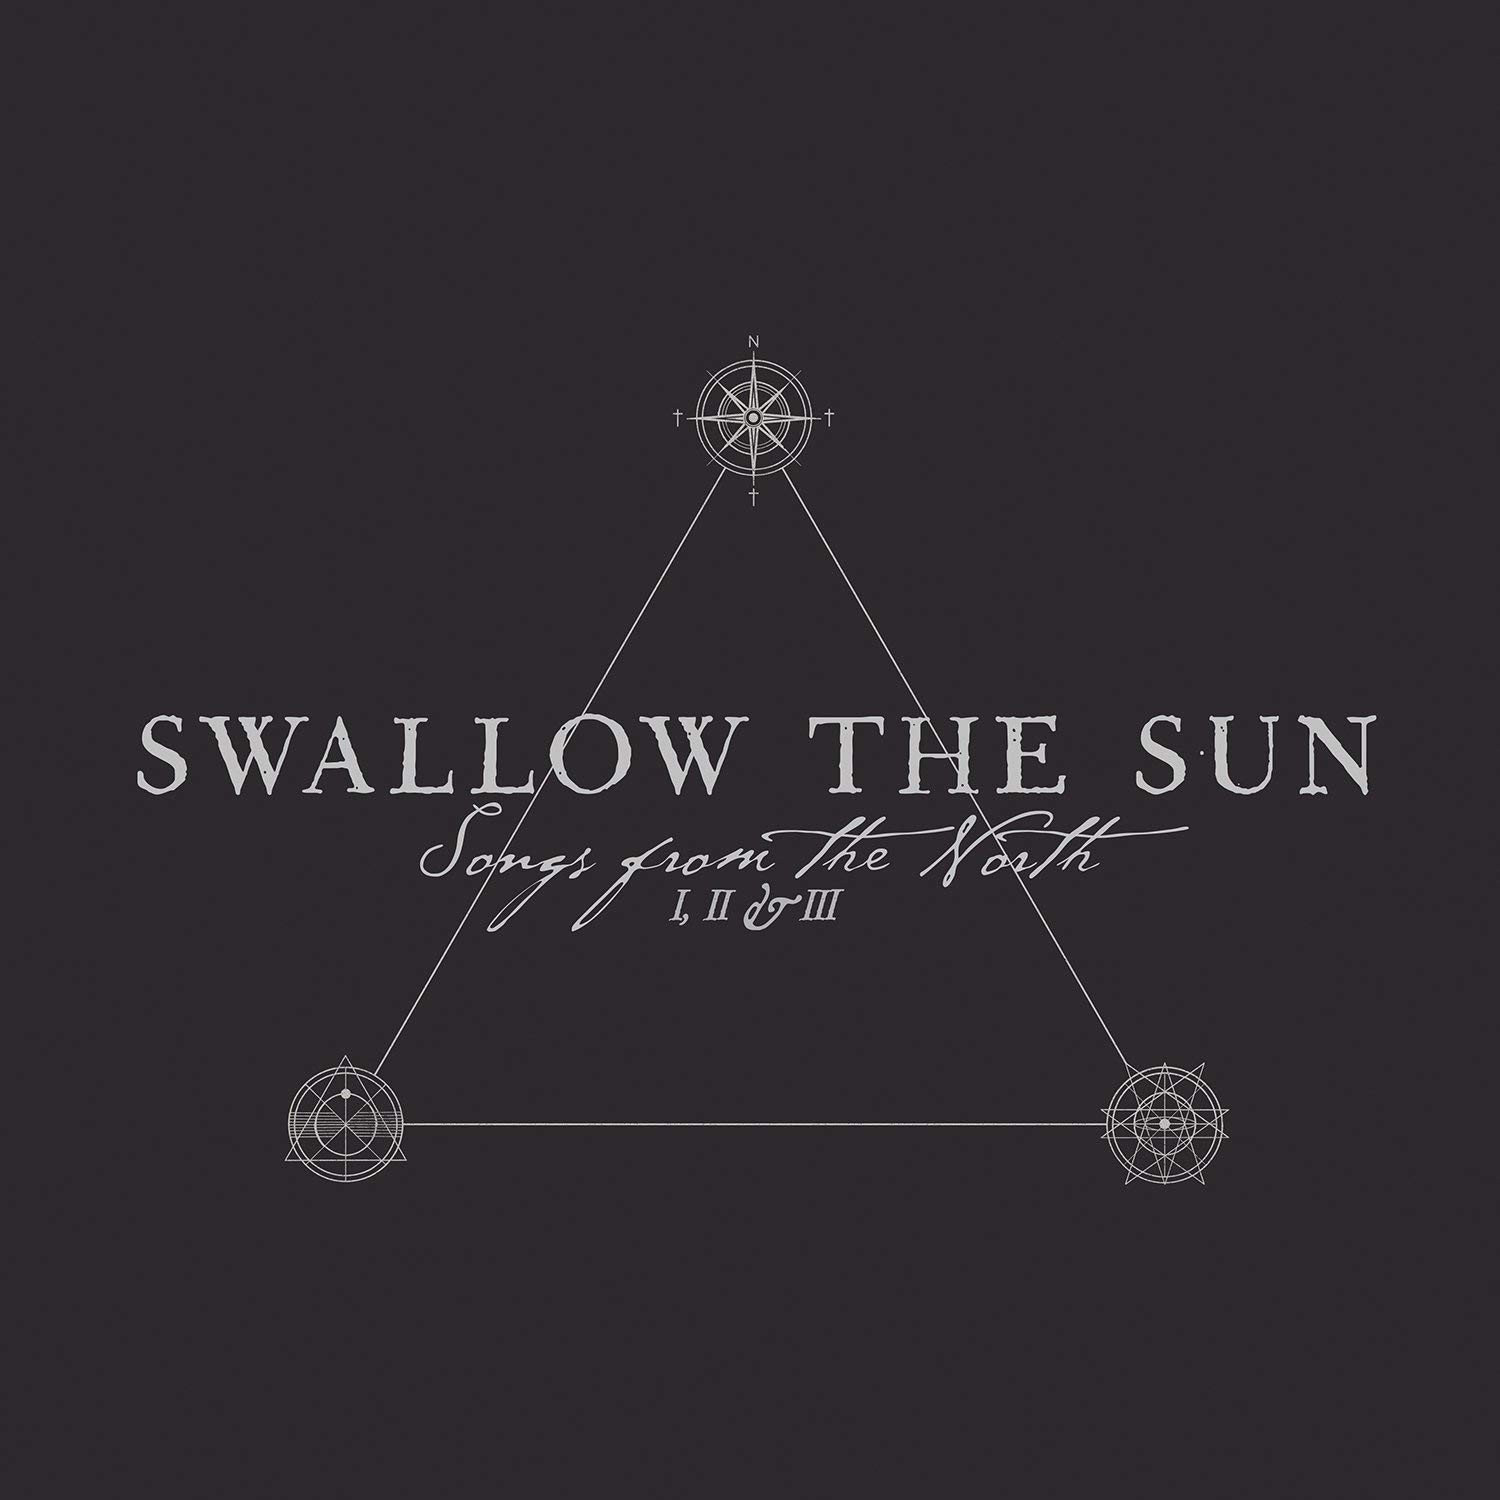 Disco de vinil Swallow The Sun Songs From the North I, II & III (5 LP)